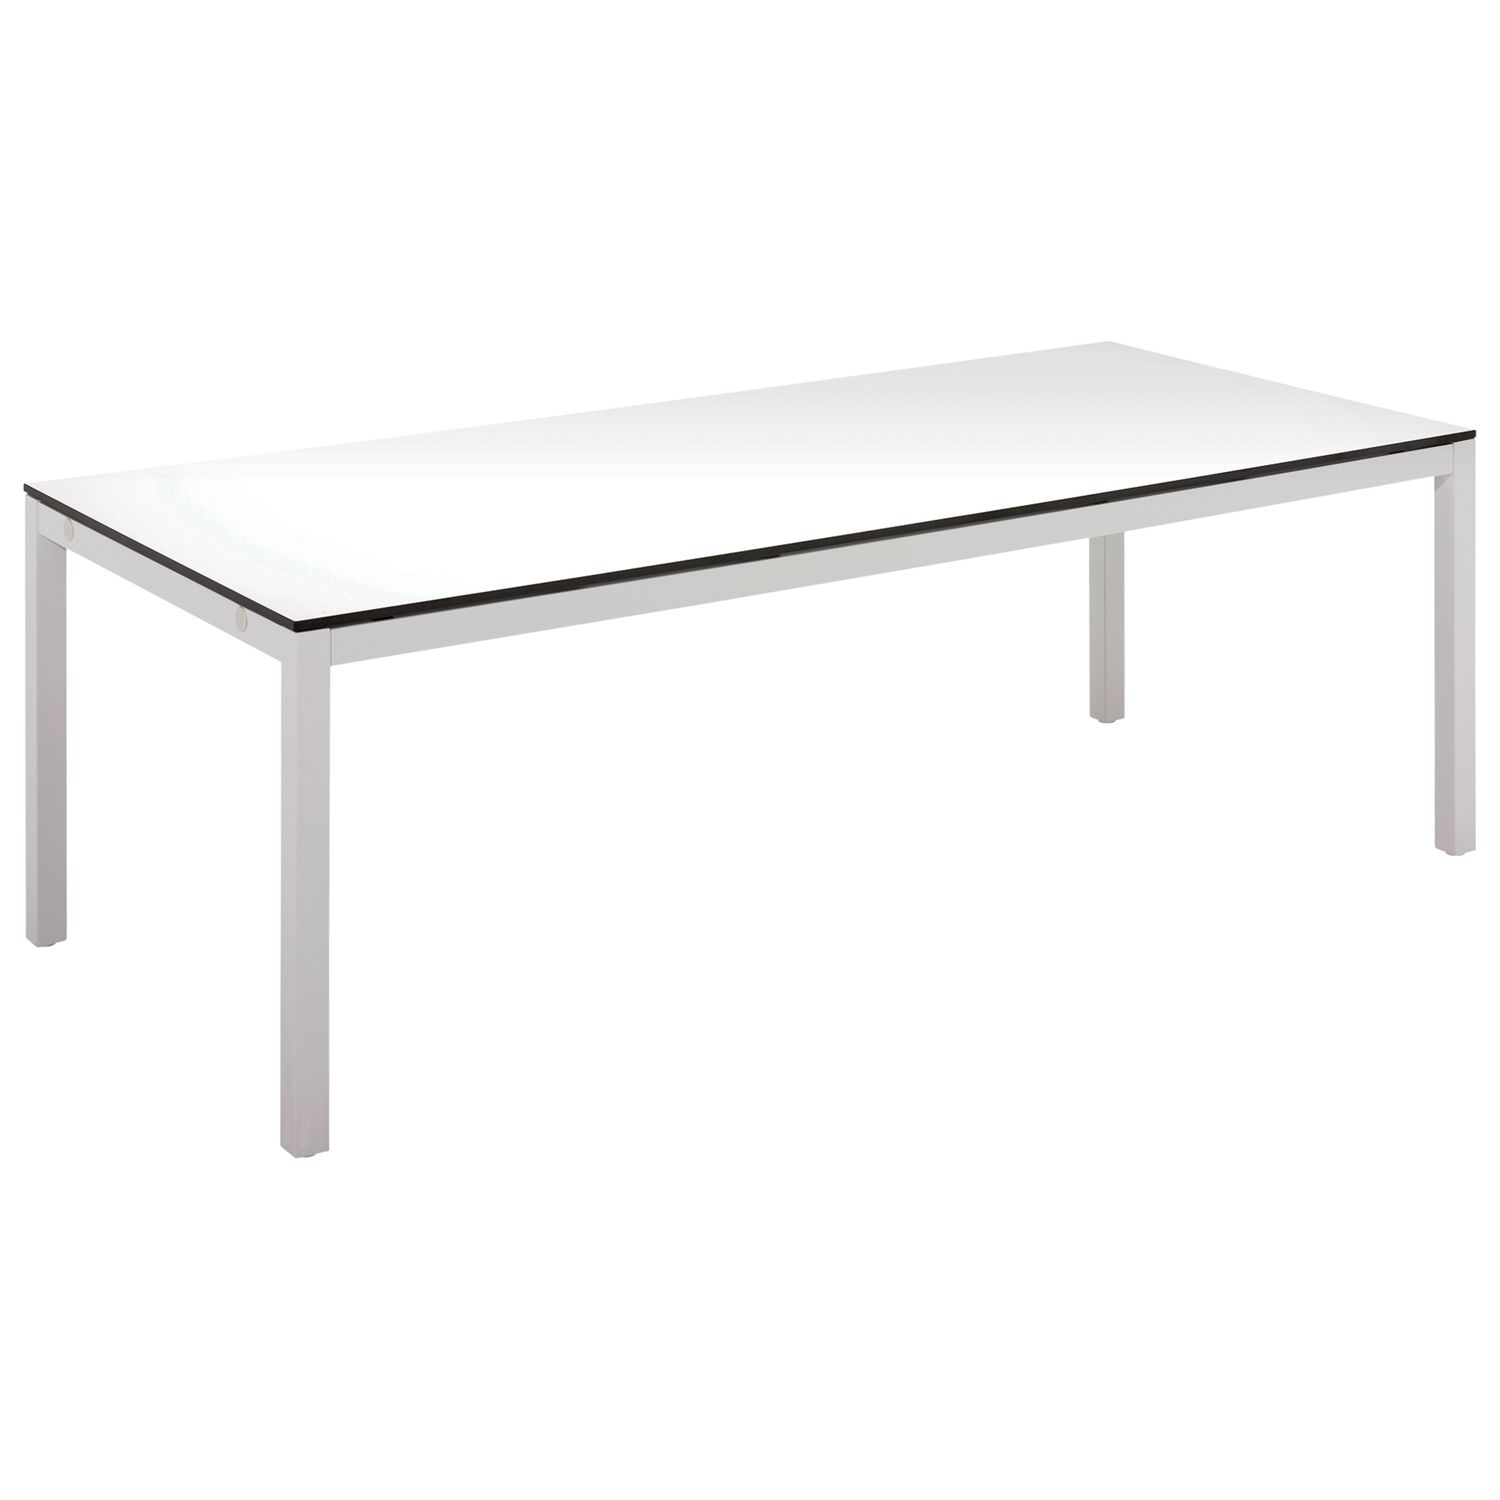 Gloster Riva Rectangular 8 Seater Outdoor Dining Table, White HPL / Crystal White, width 220cm